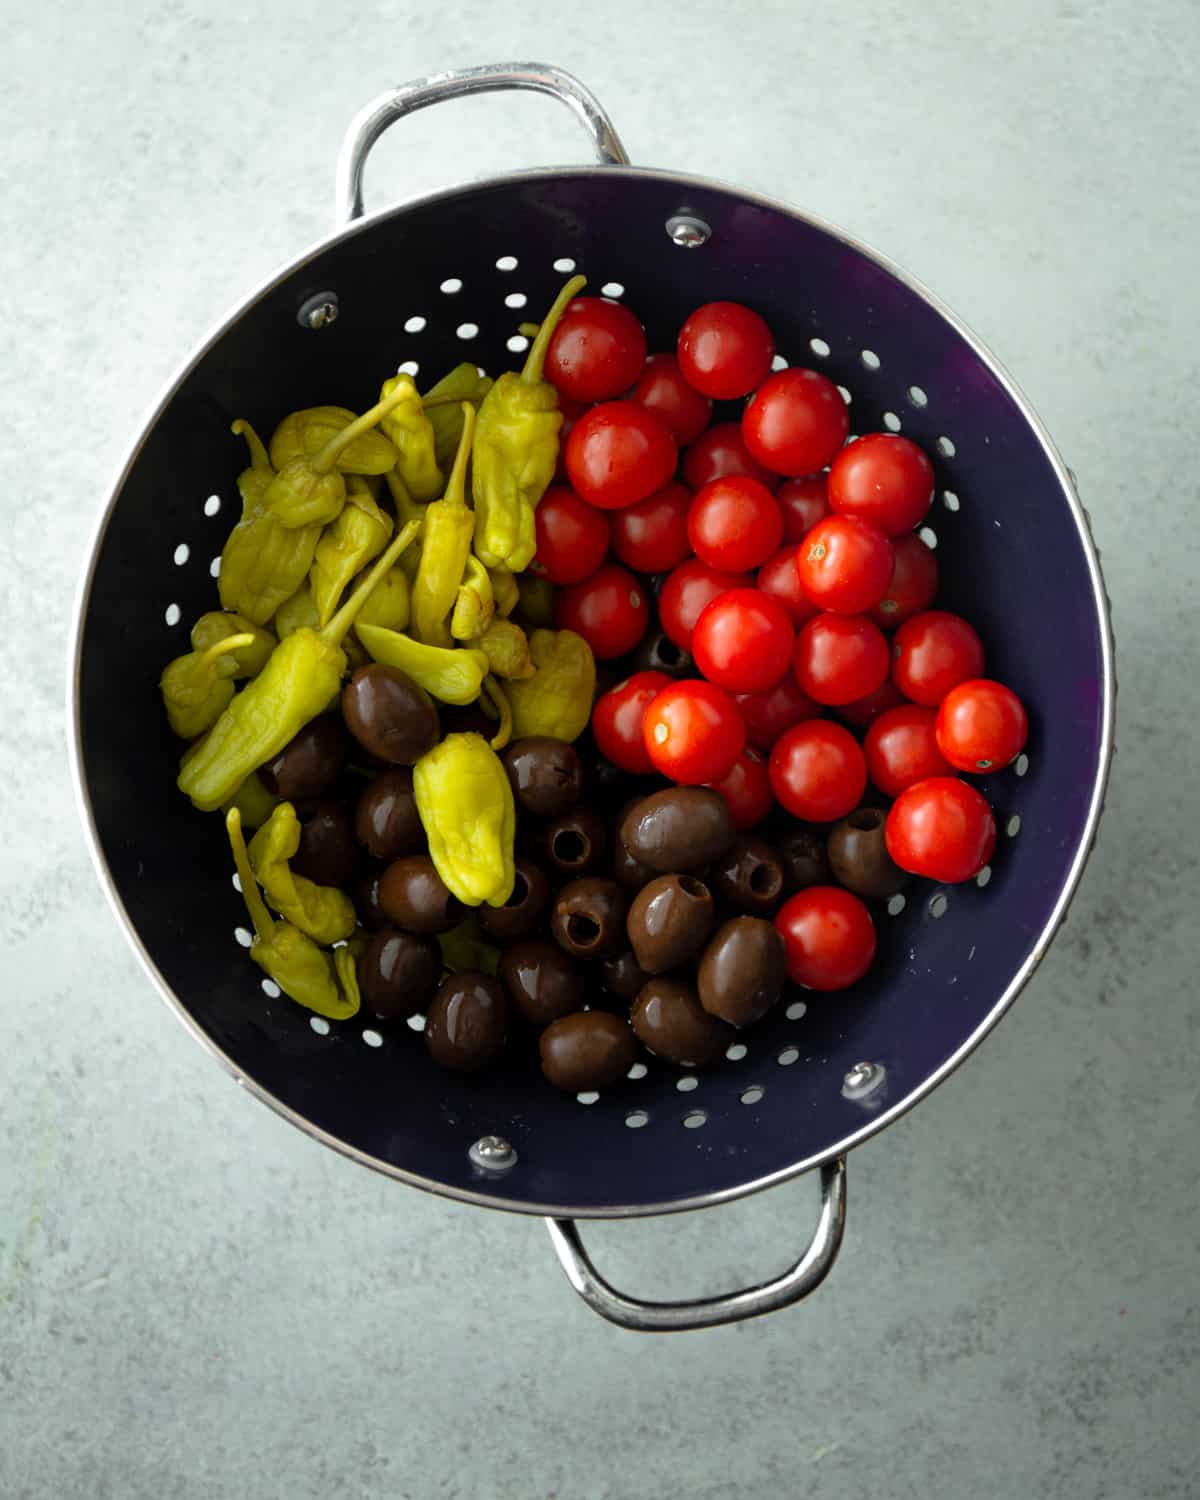 tomatoes, peppers and olives in a colander